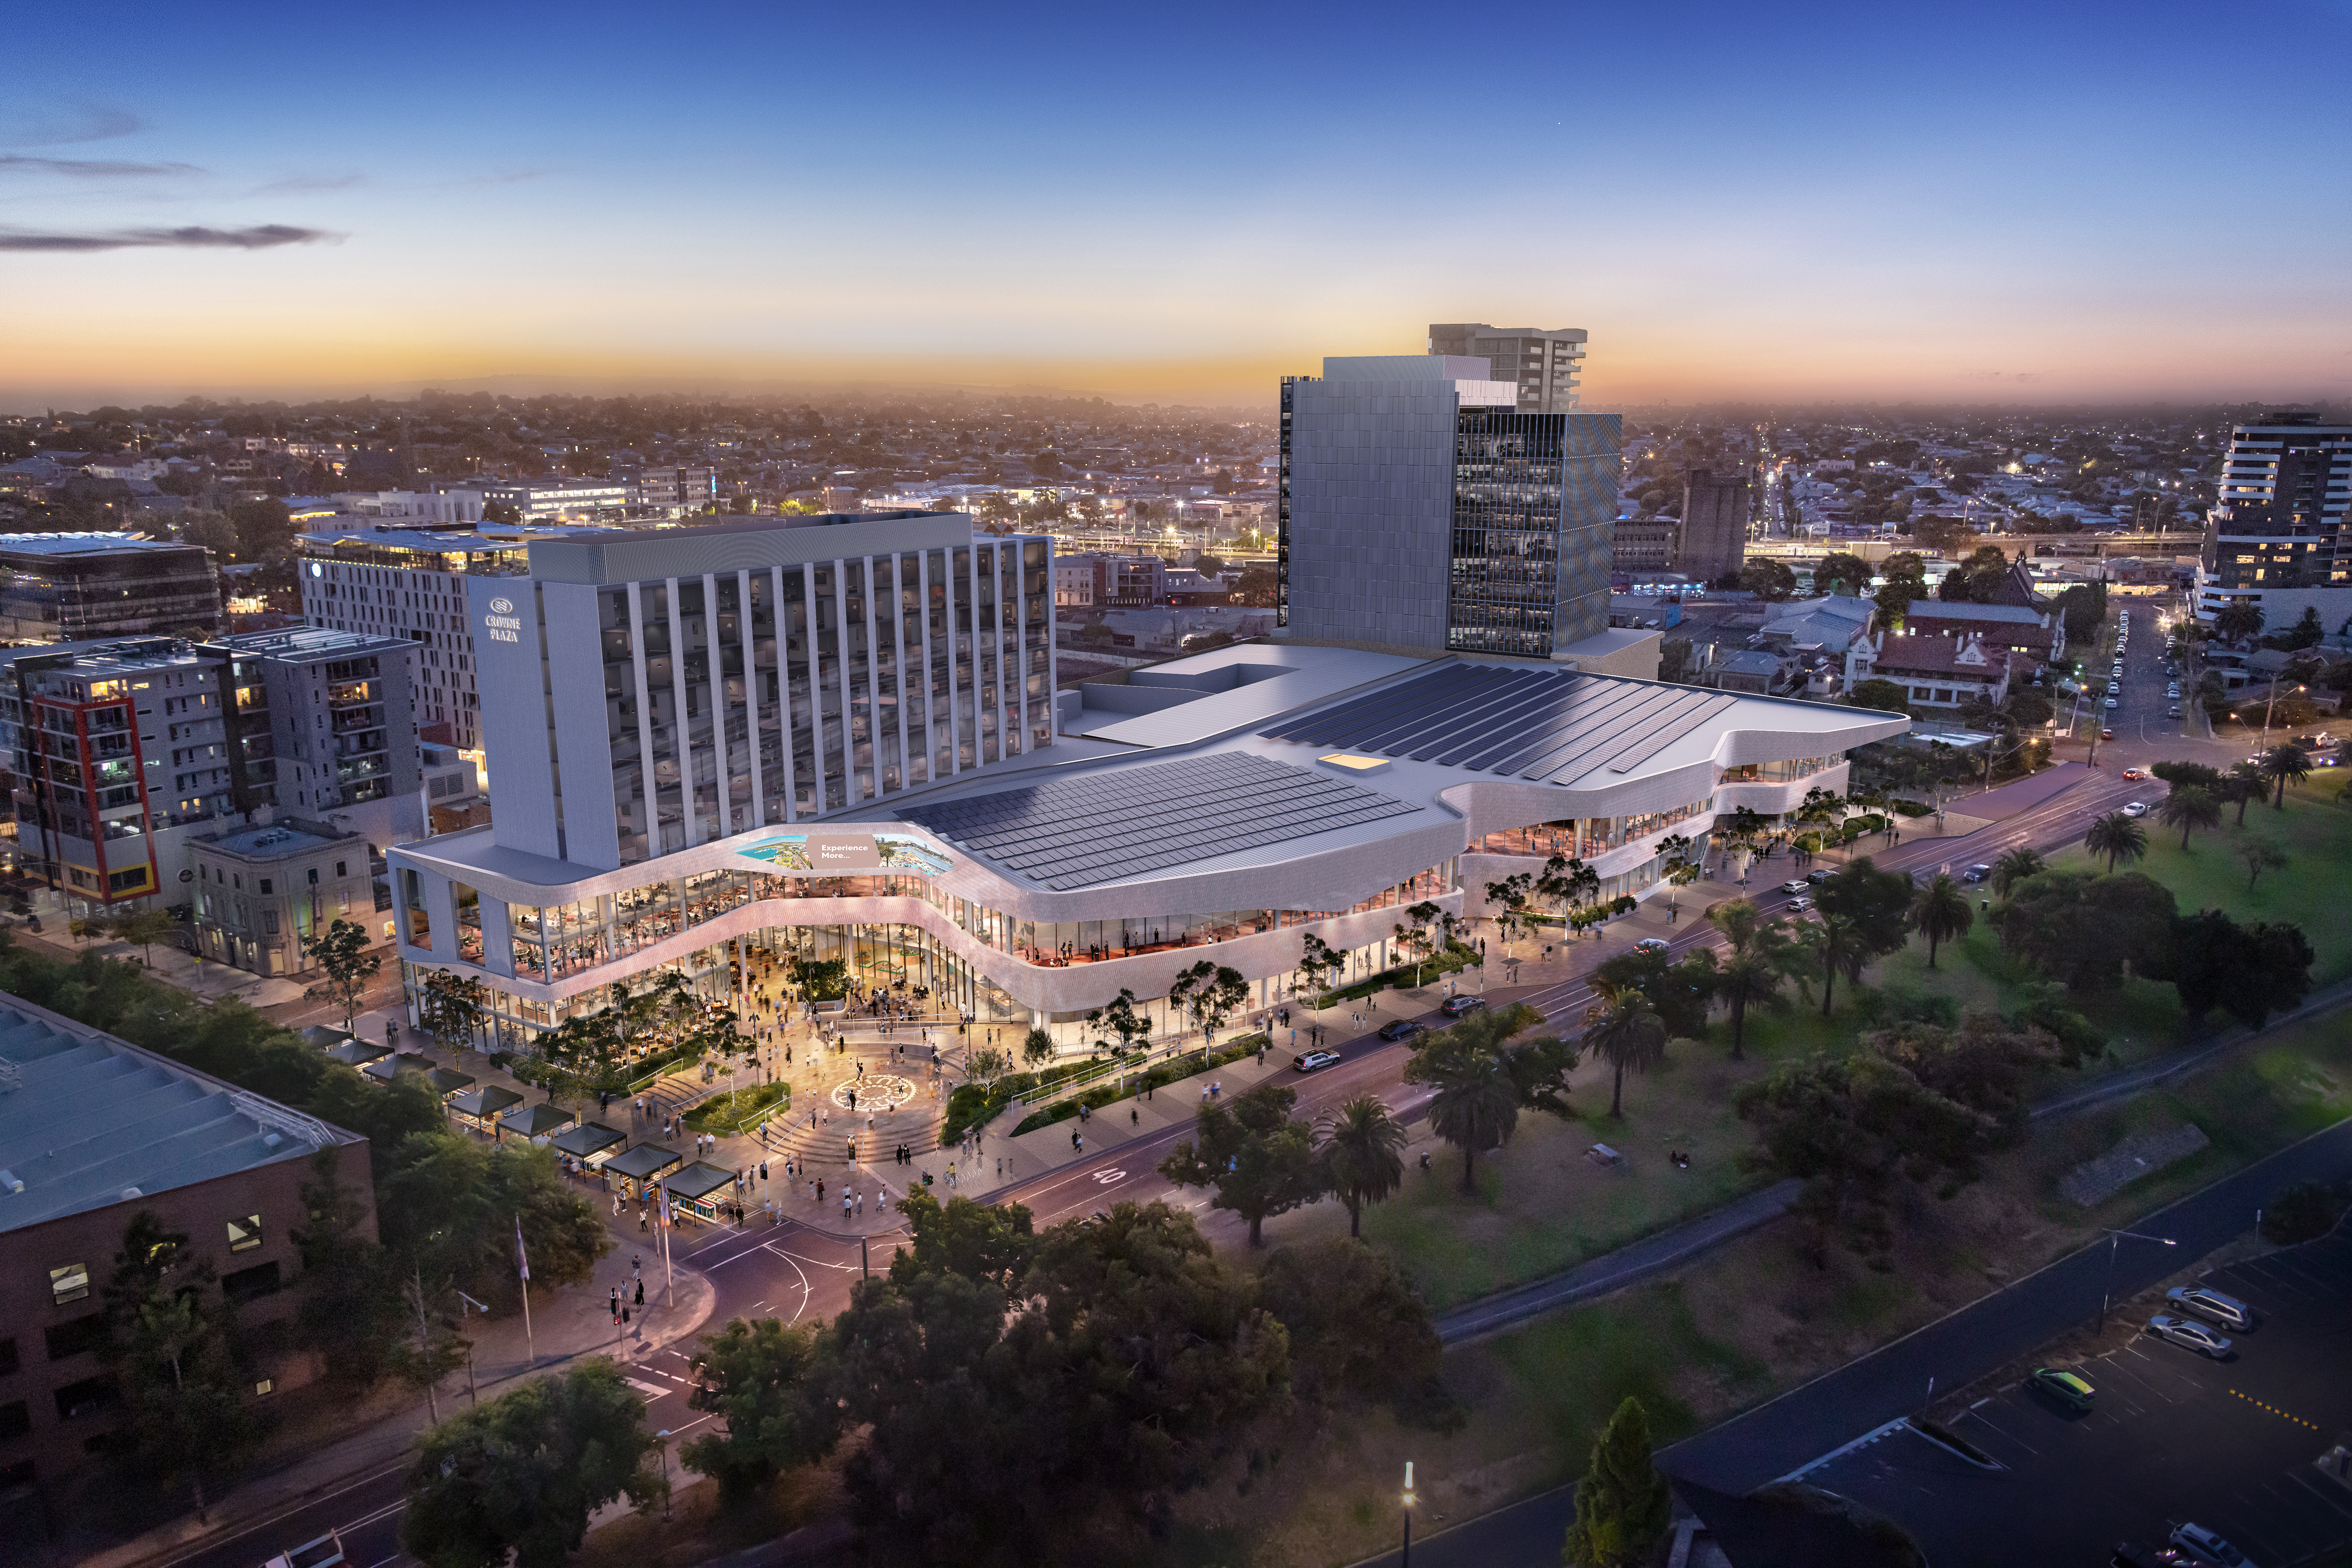 Artist impression of the Geelong Convention and Exhibition Centre aerial view